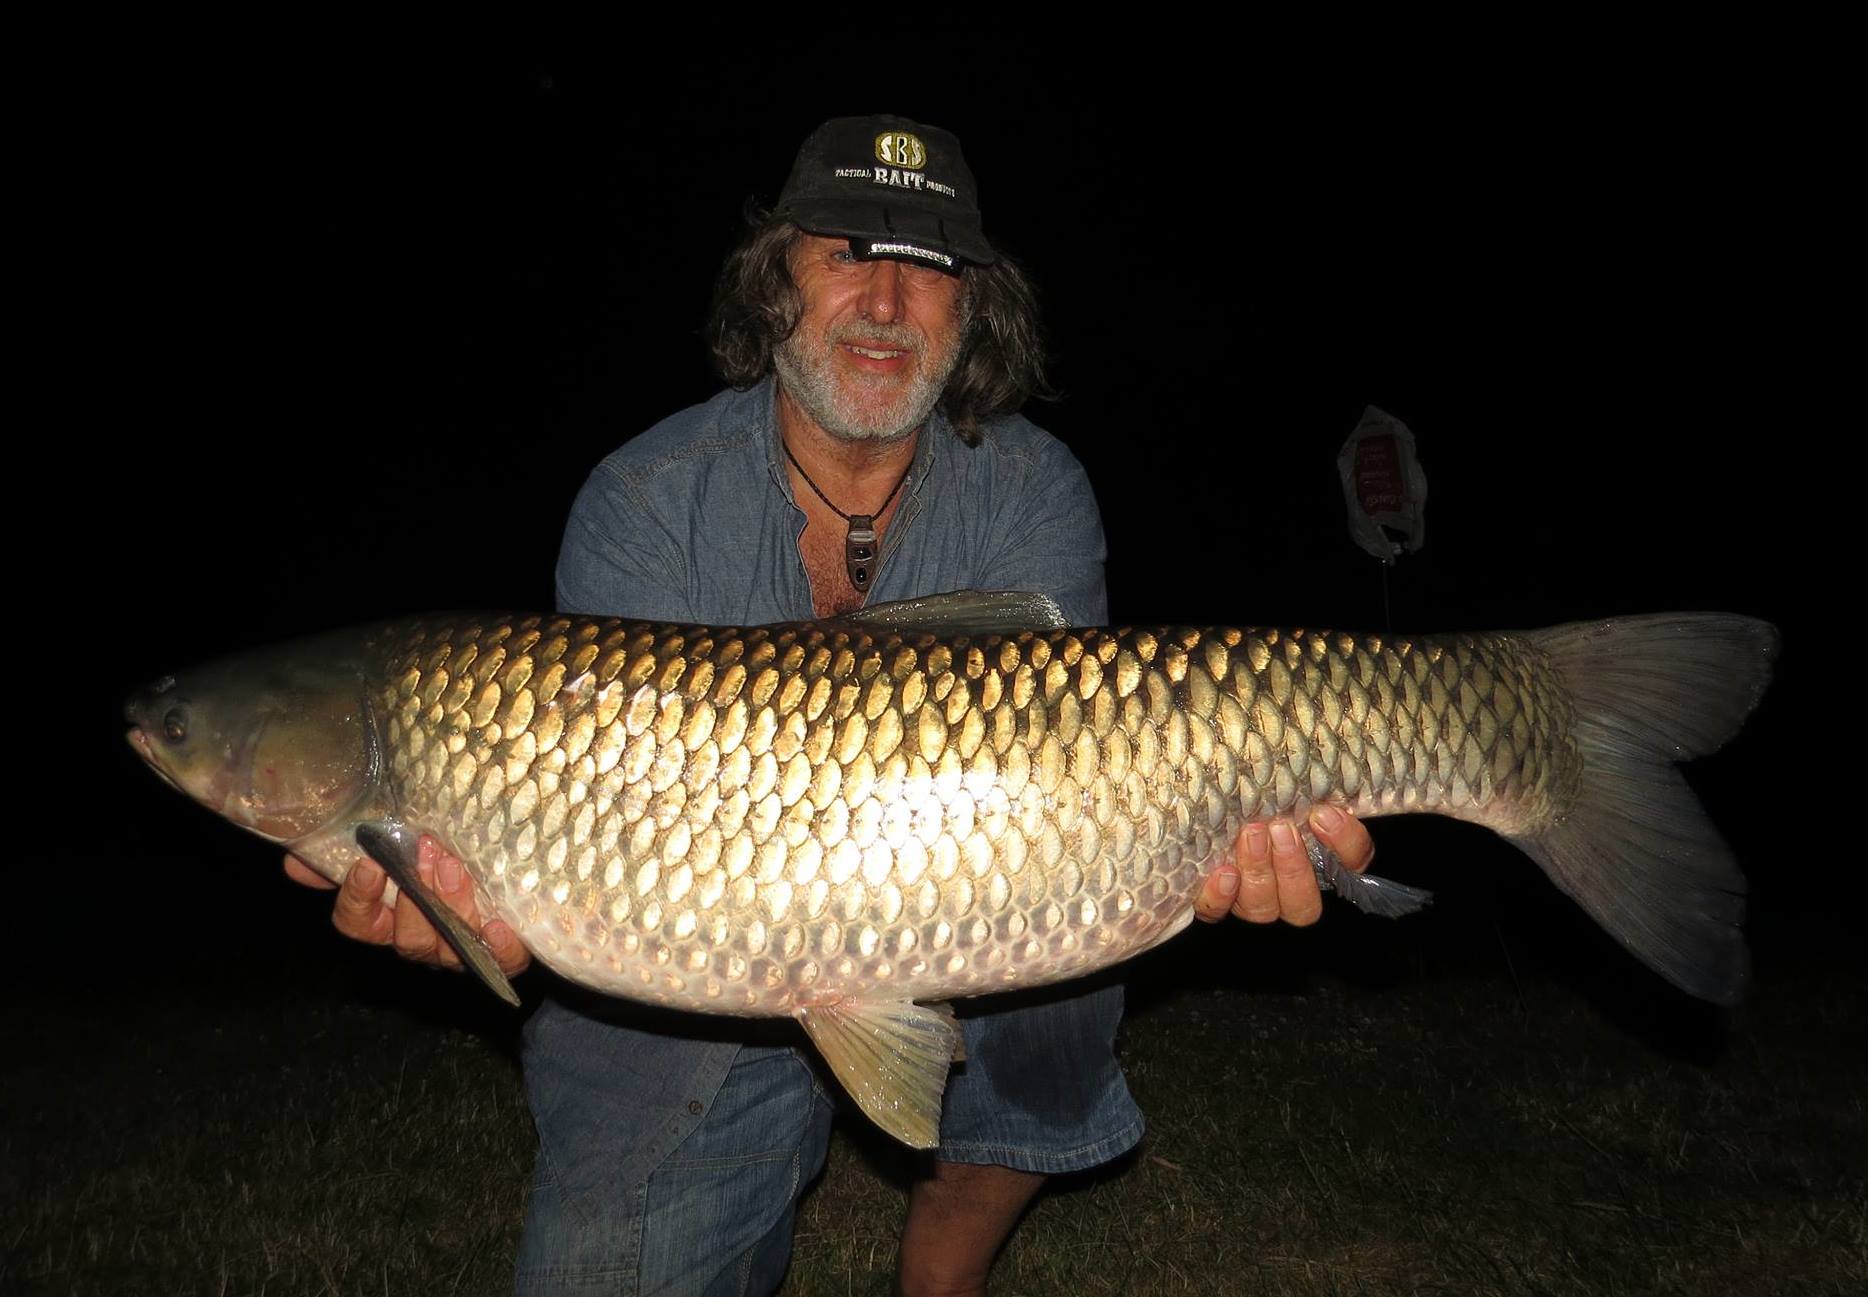 Maybe I was trying to avoid catching more grass carp, but this fantastic creature put a smile on my face for sure!